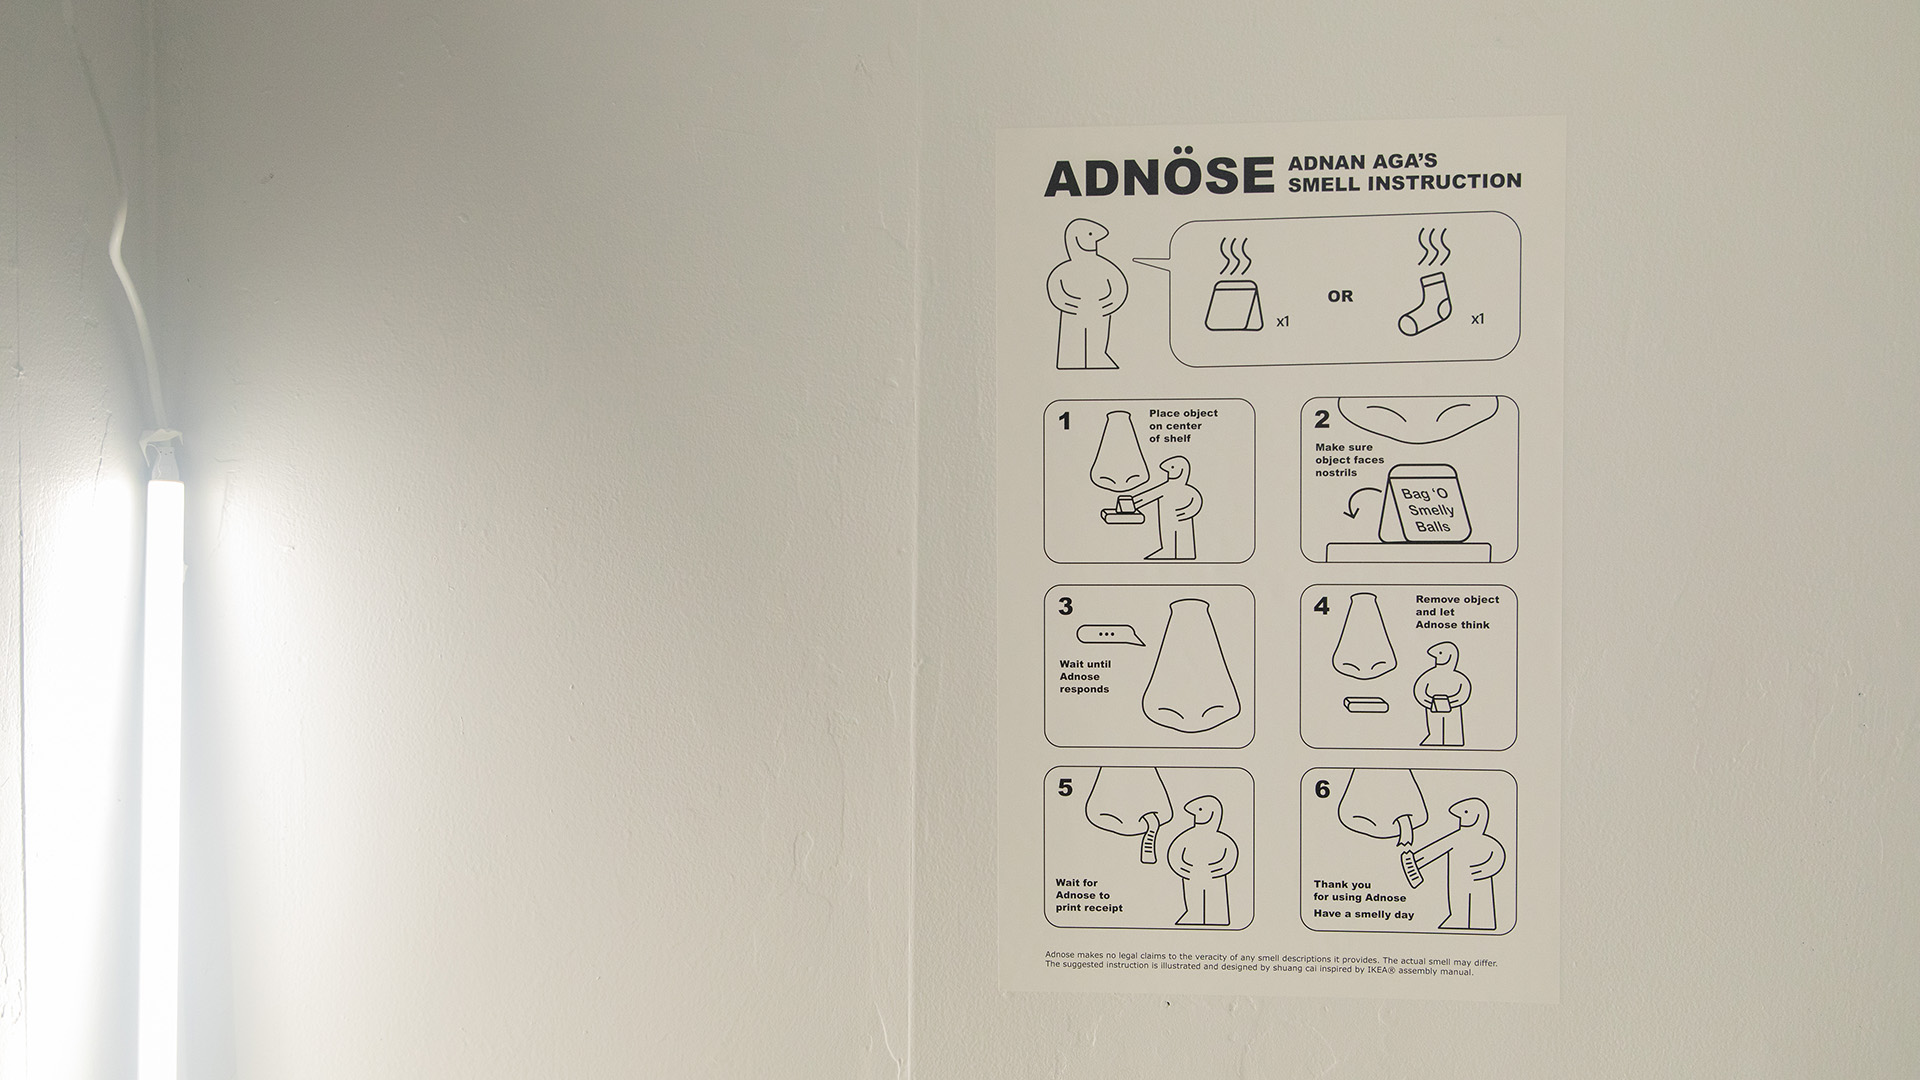 An instruction manual for how to smell in the format of an IKEA Instruction manual stuck to the wall.